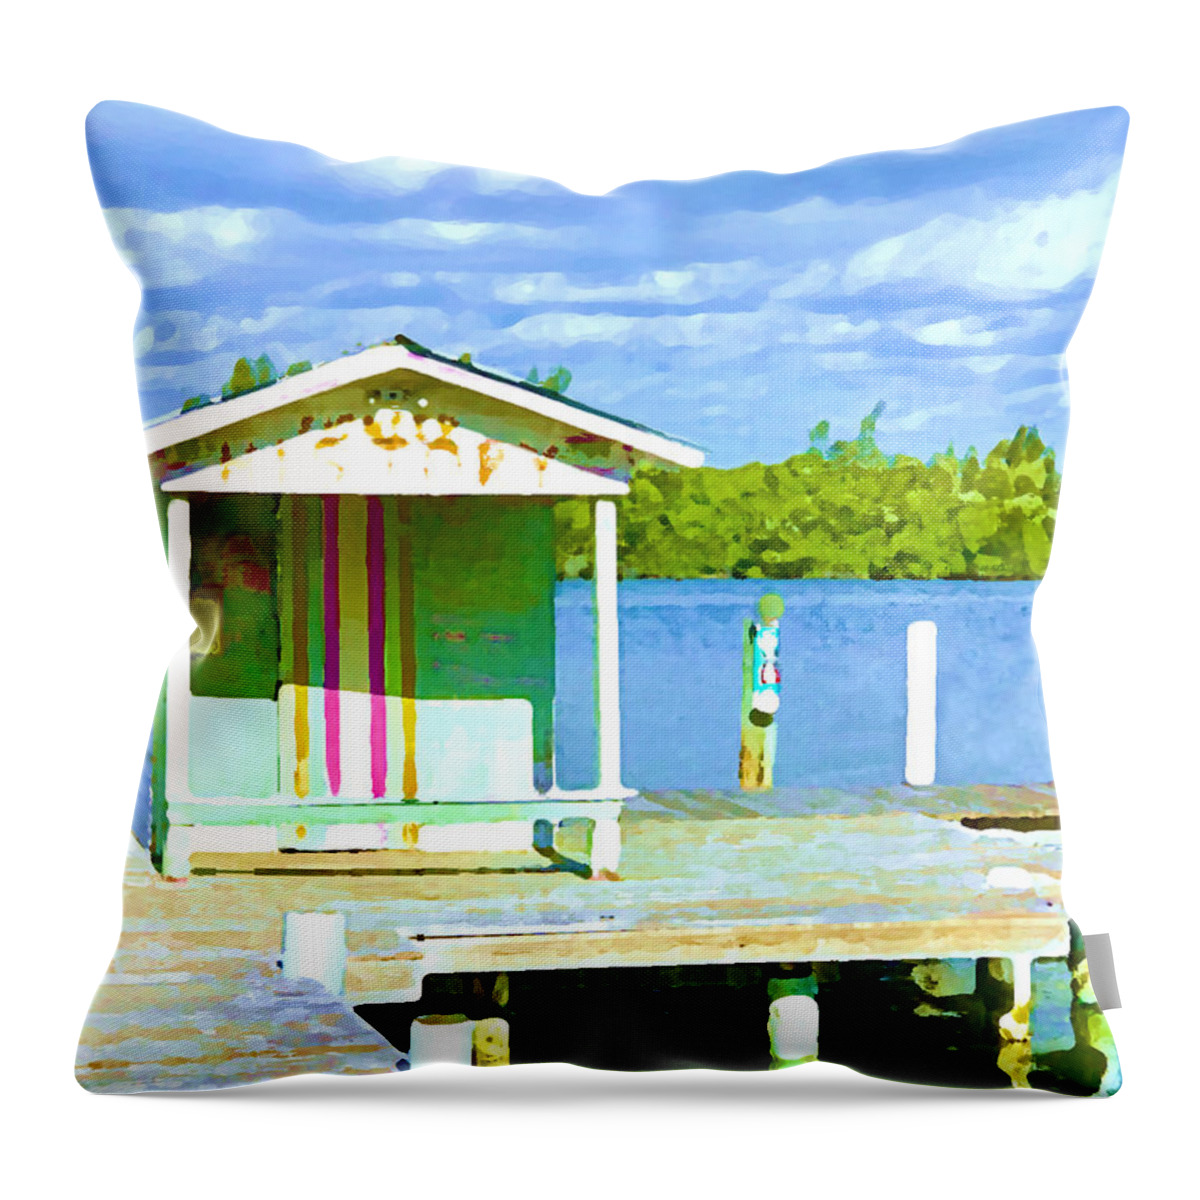 Dock Throw Pillow featuring the digital art Monkey Trail by Tom Johnson